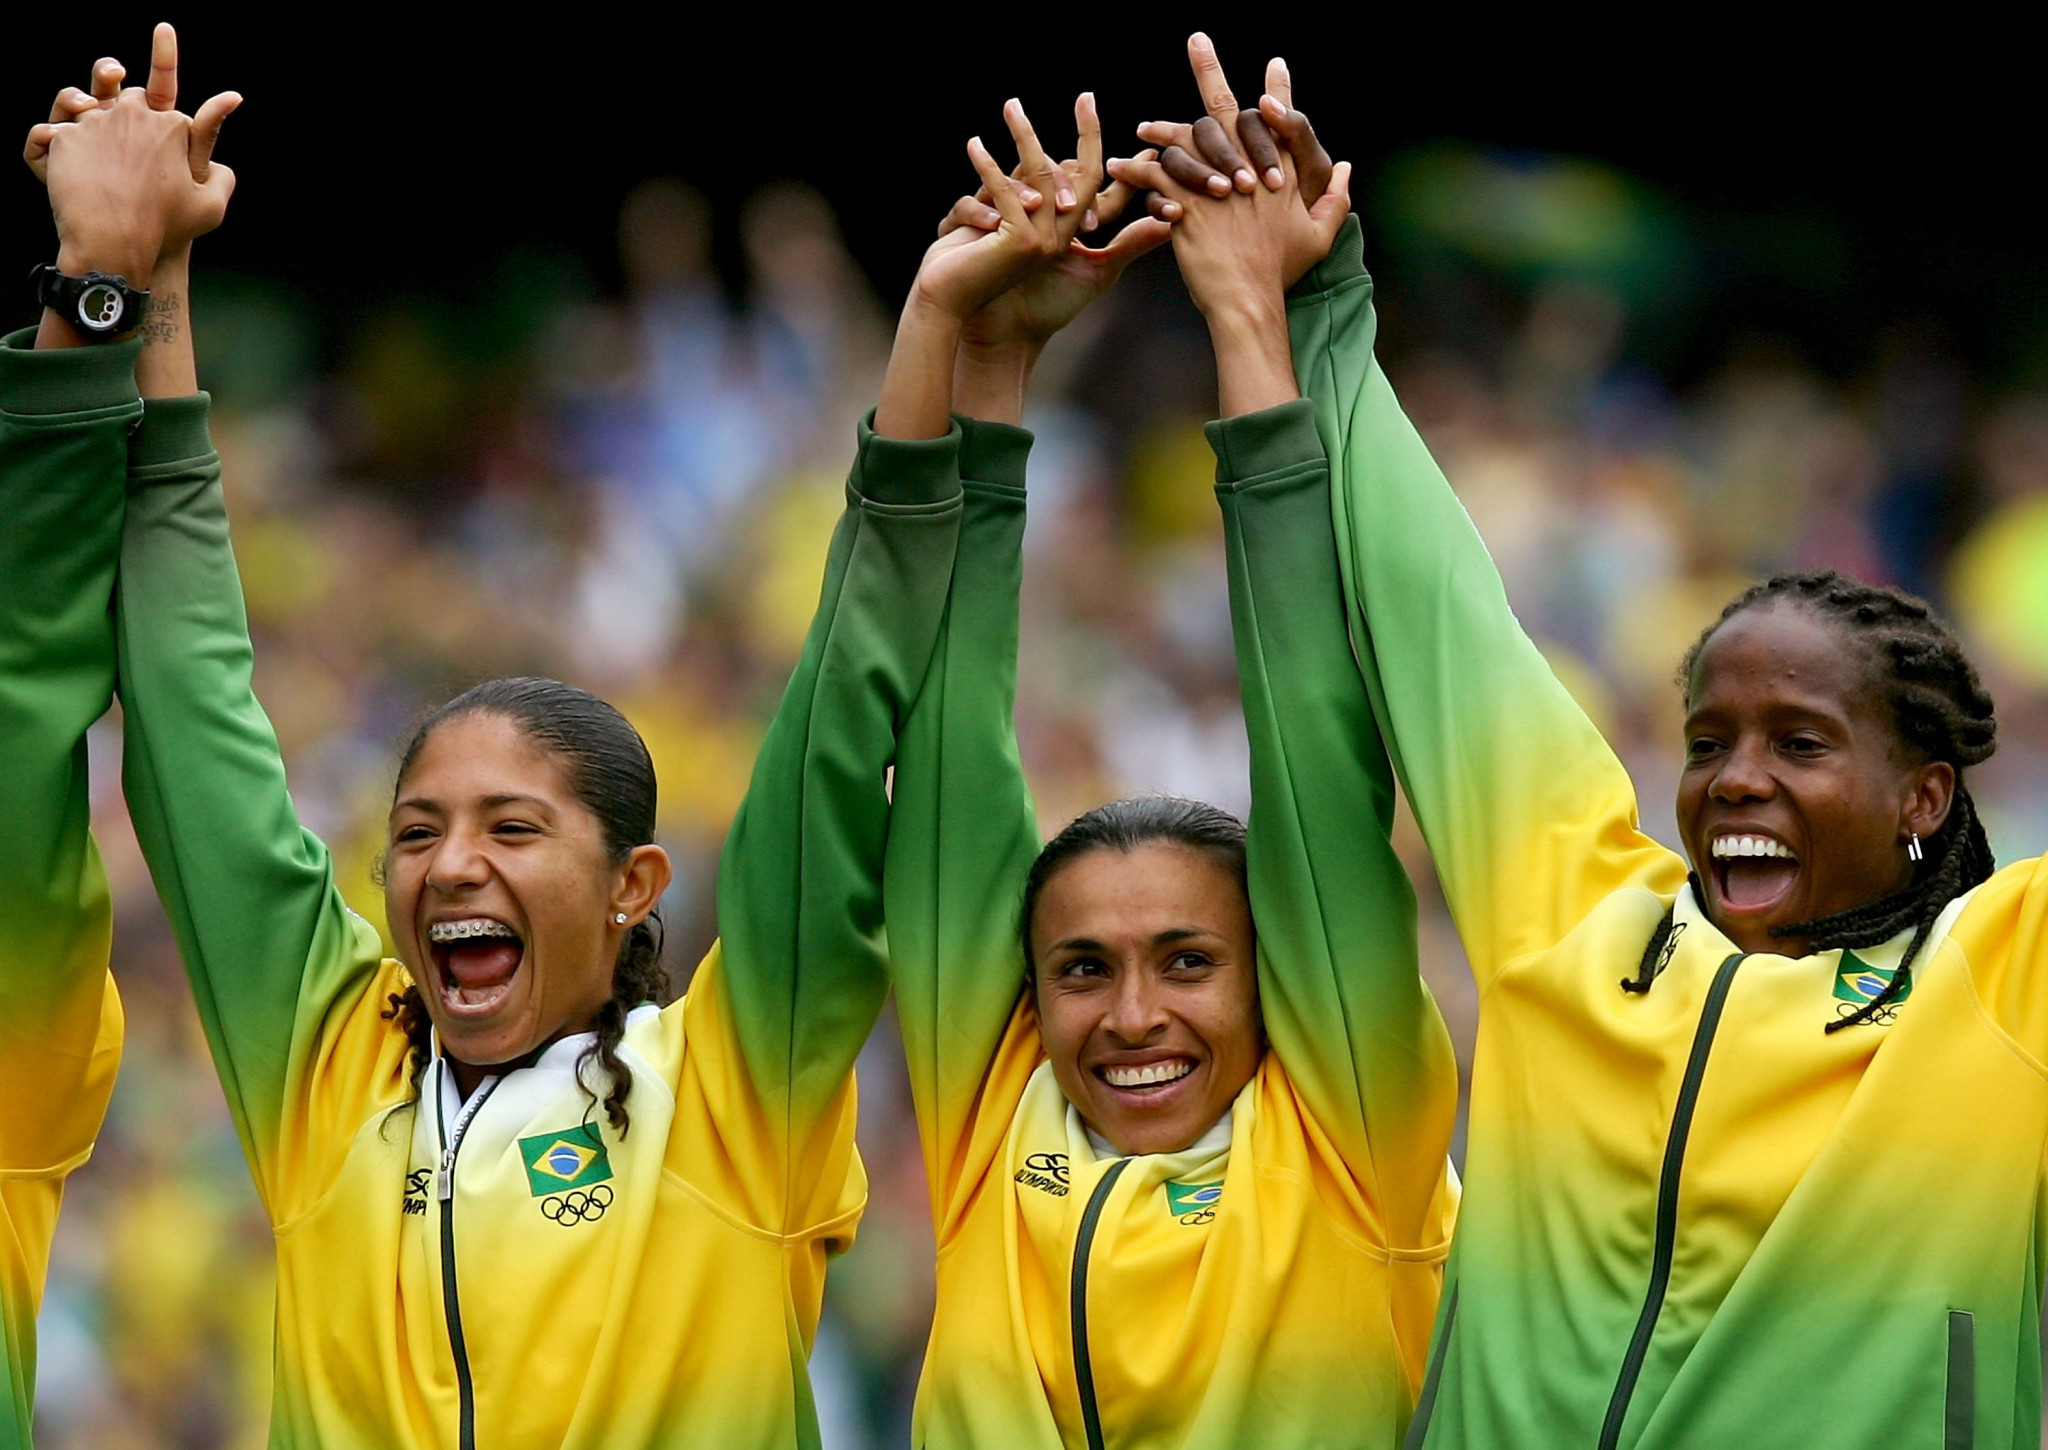 Brazil are the most successful team in the women's football event with three gold medals ©Getty Images